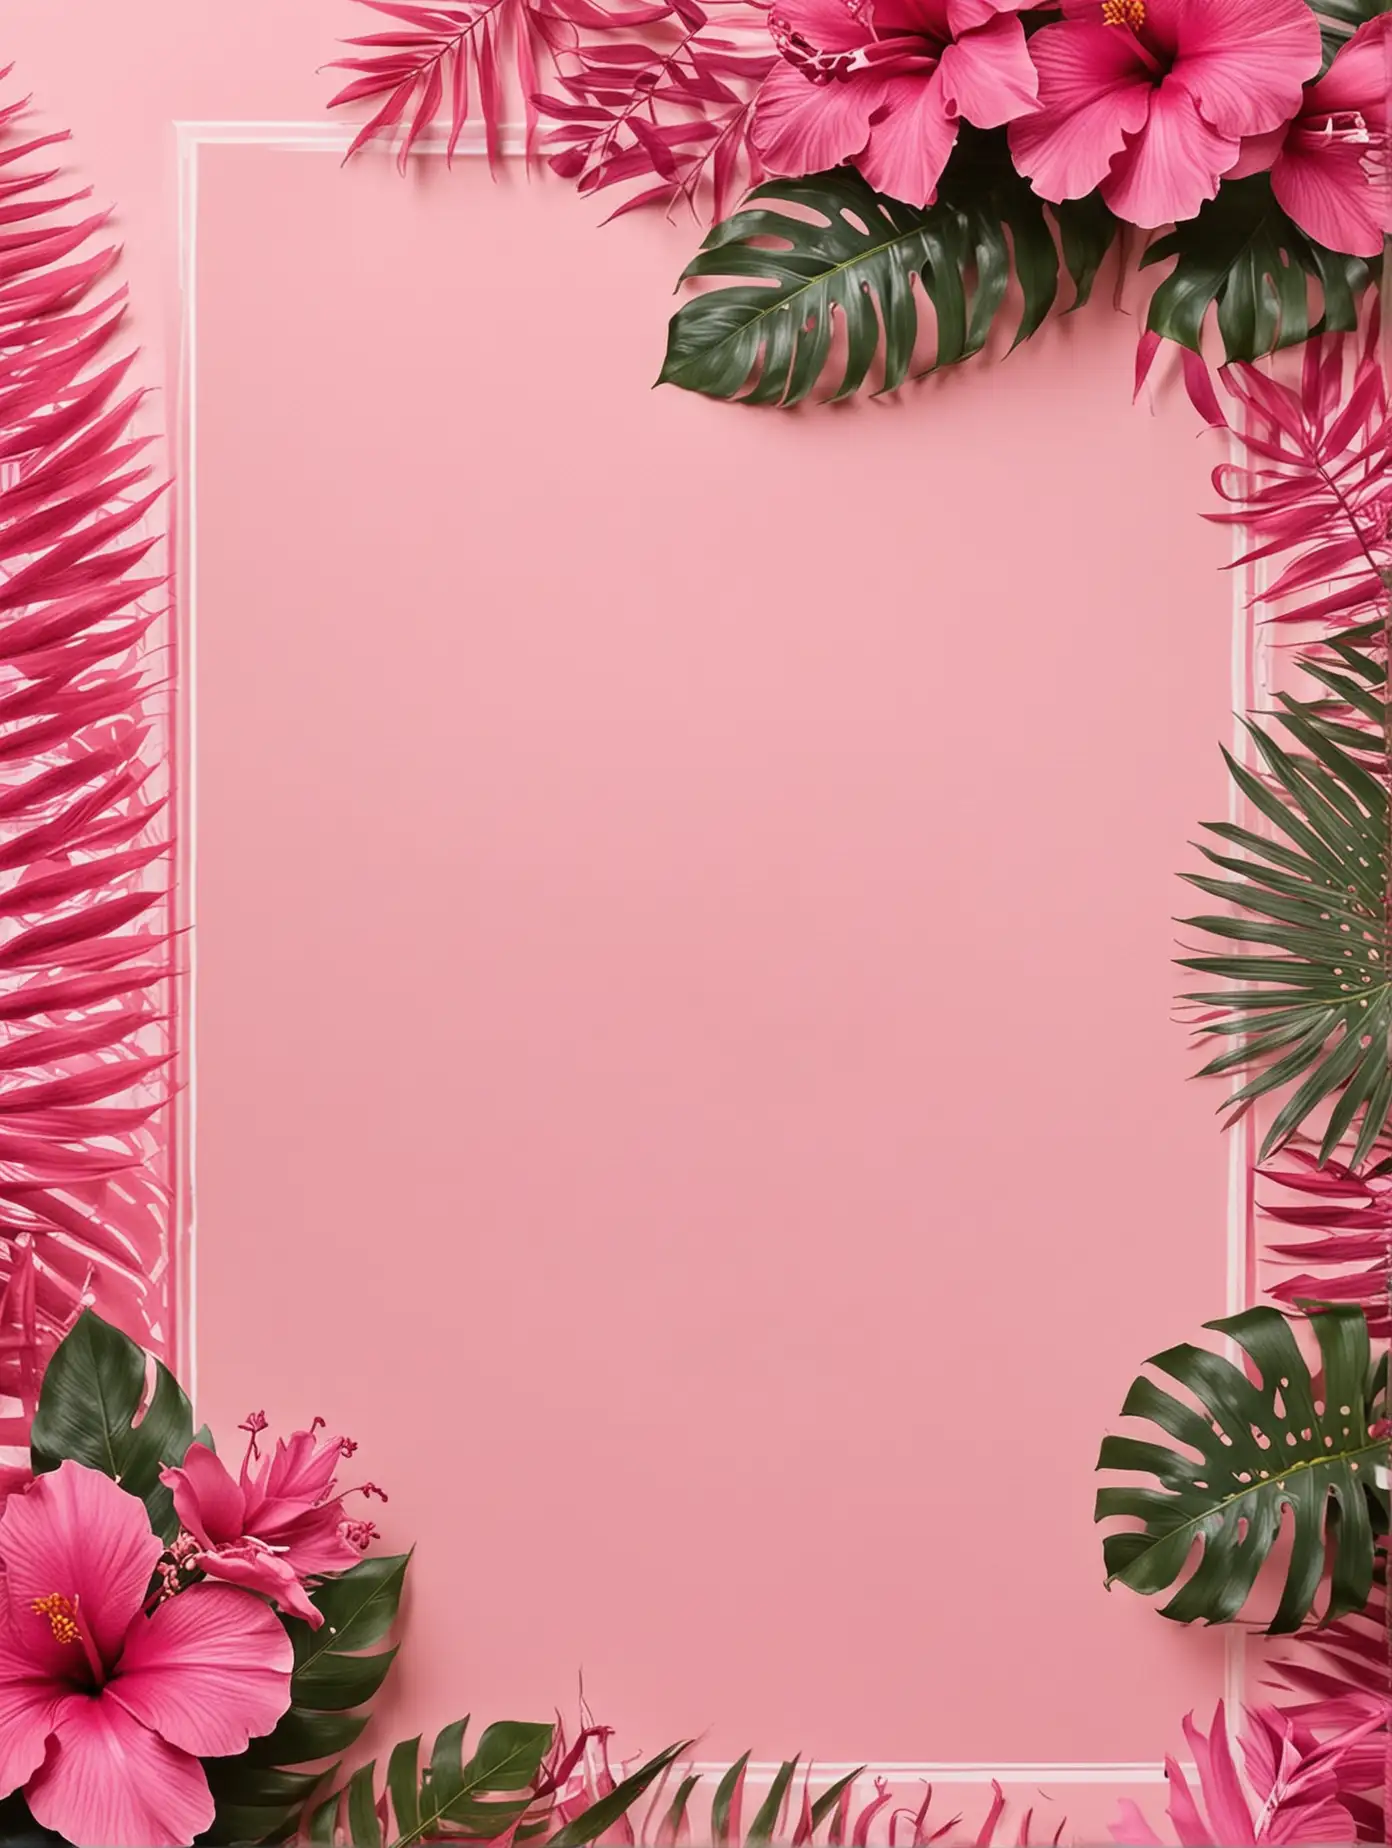 Tropical border back ground featuring shades of pink